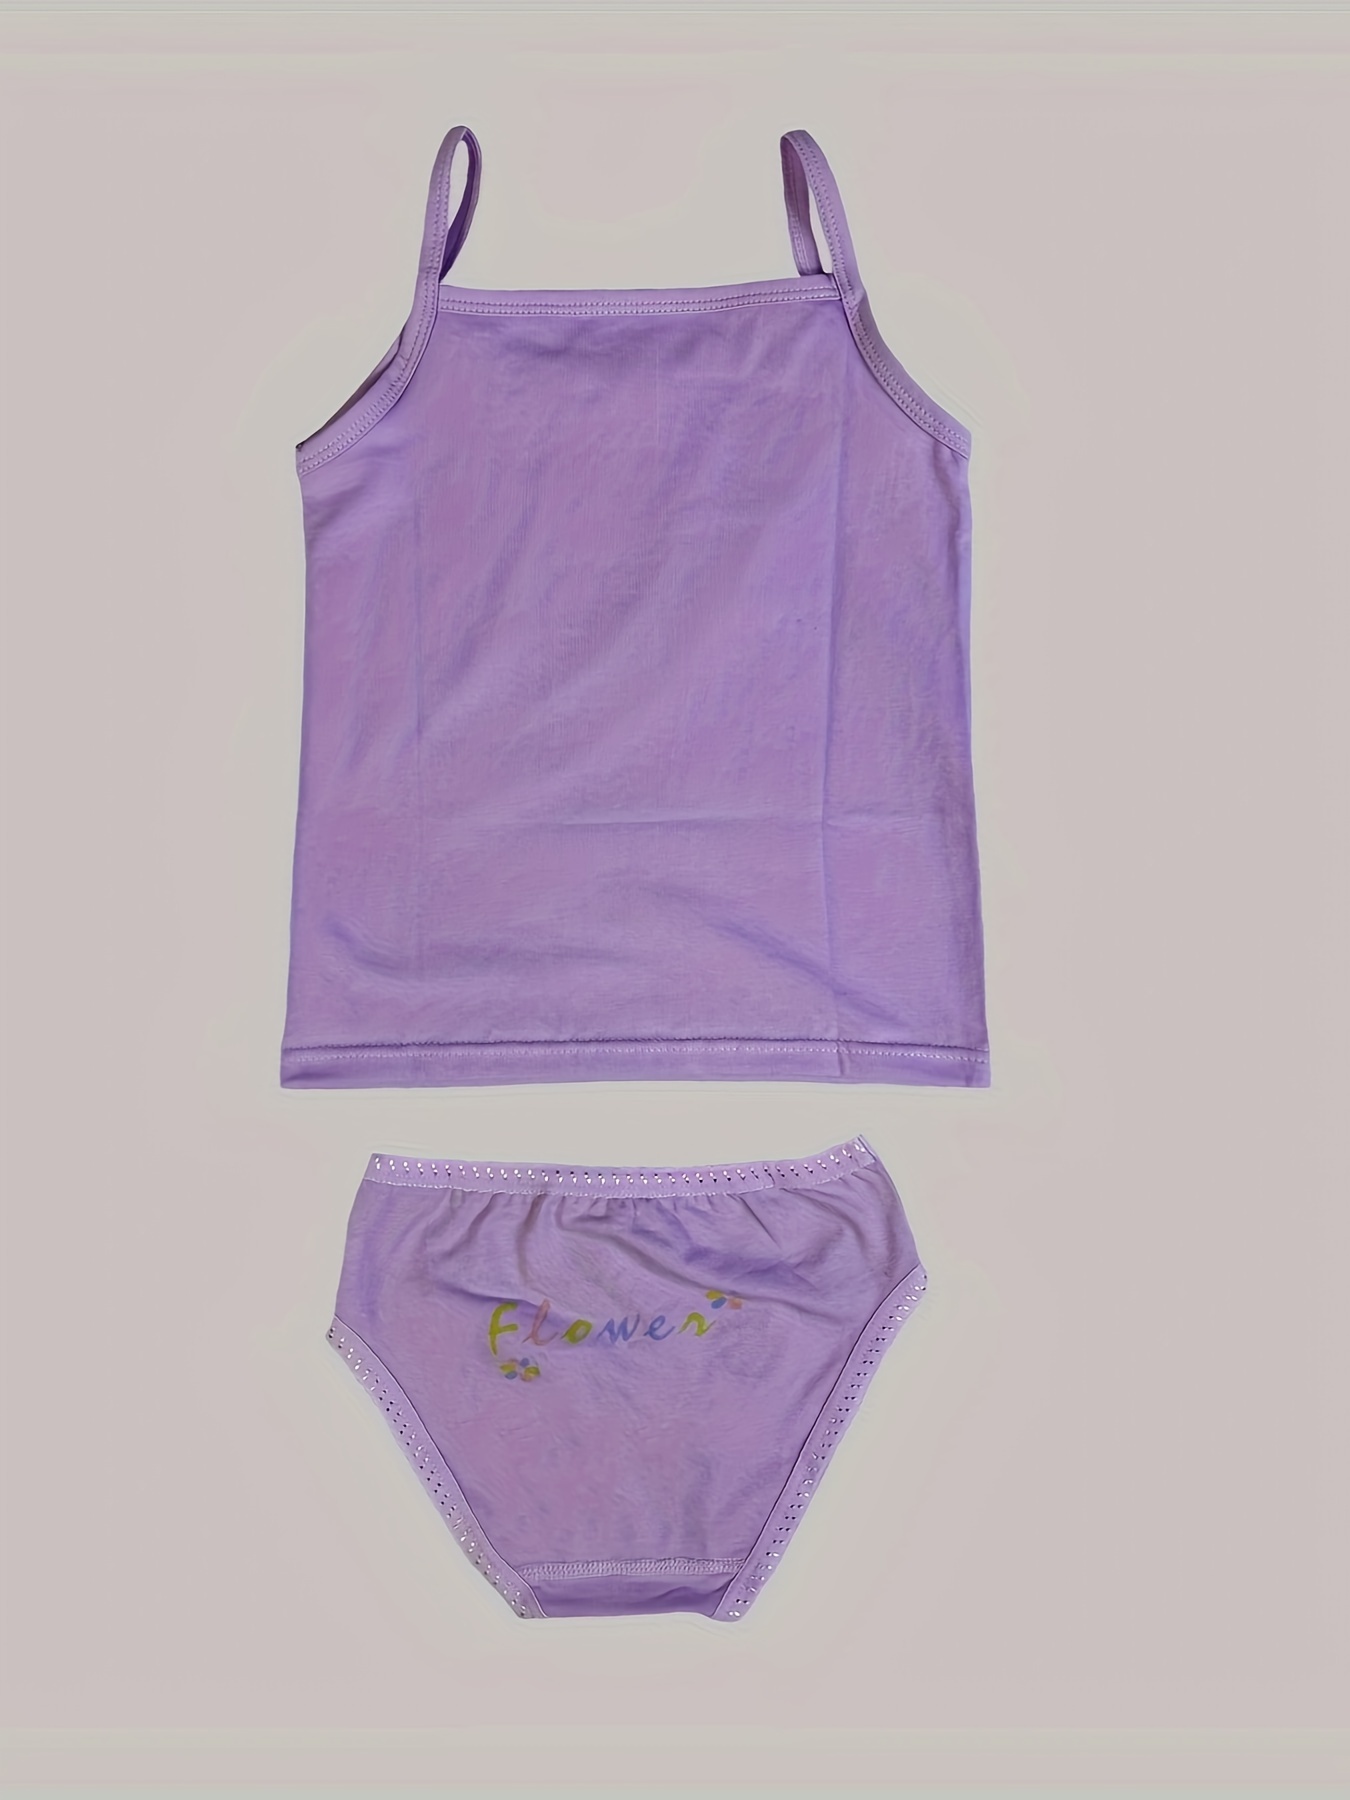 Girls Crepe Camisole Top Underwear Set For Middle School